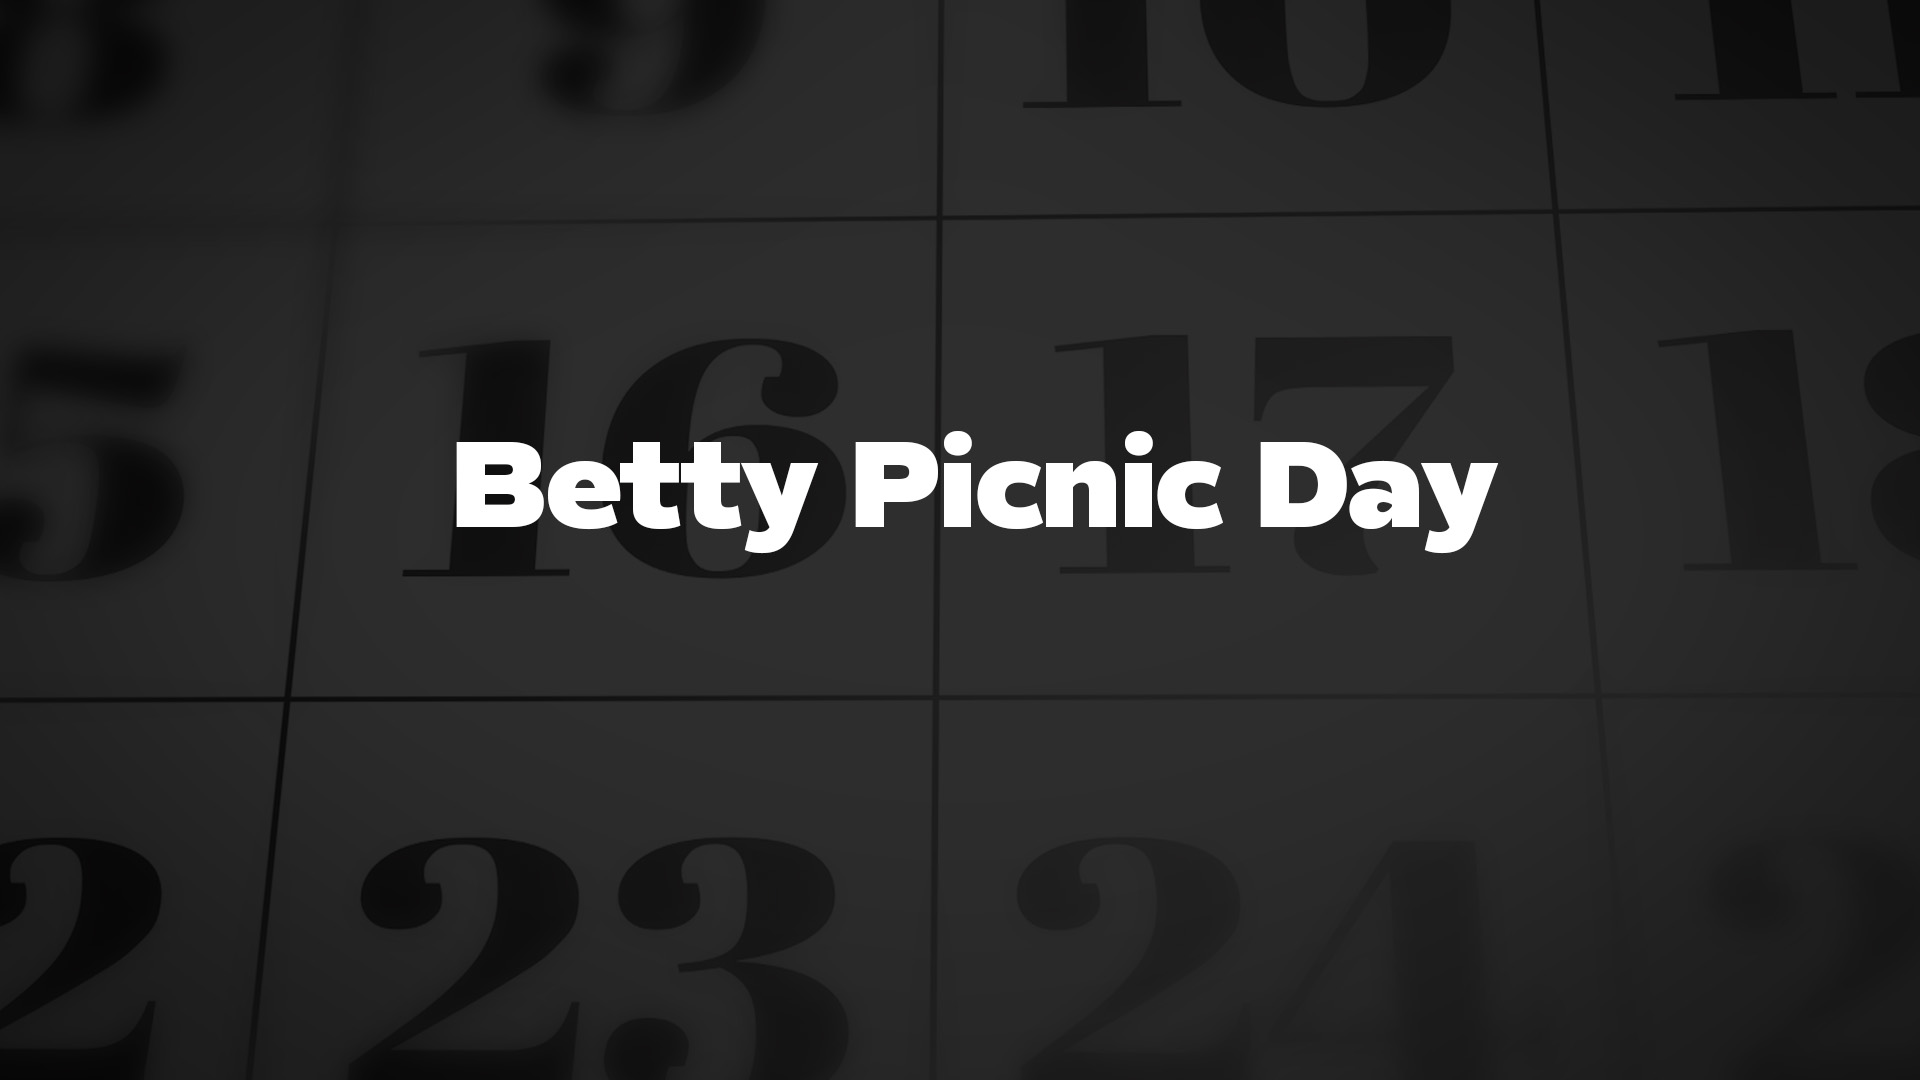 Betty Picnic Day - List of National Days